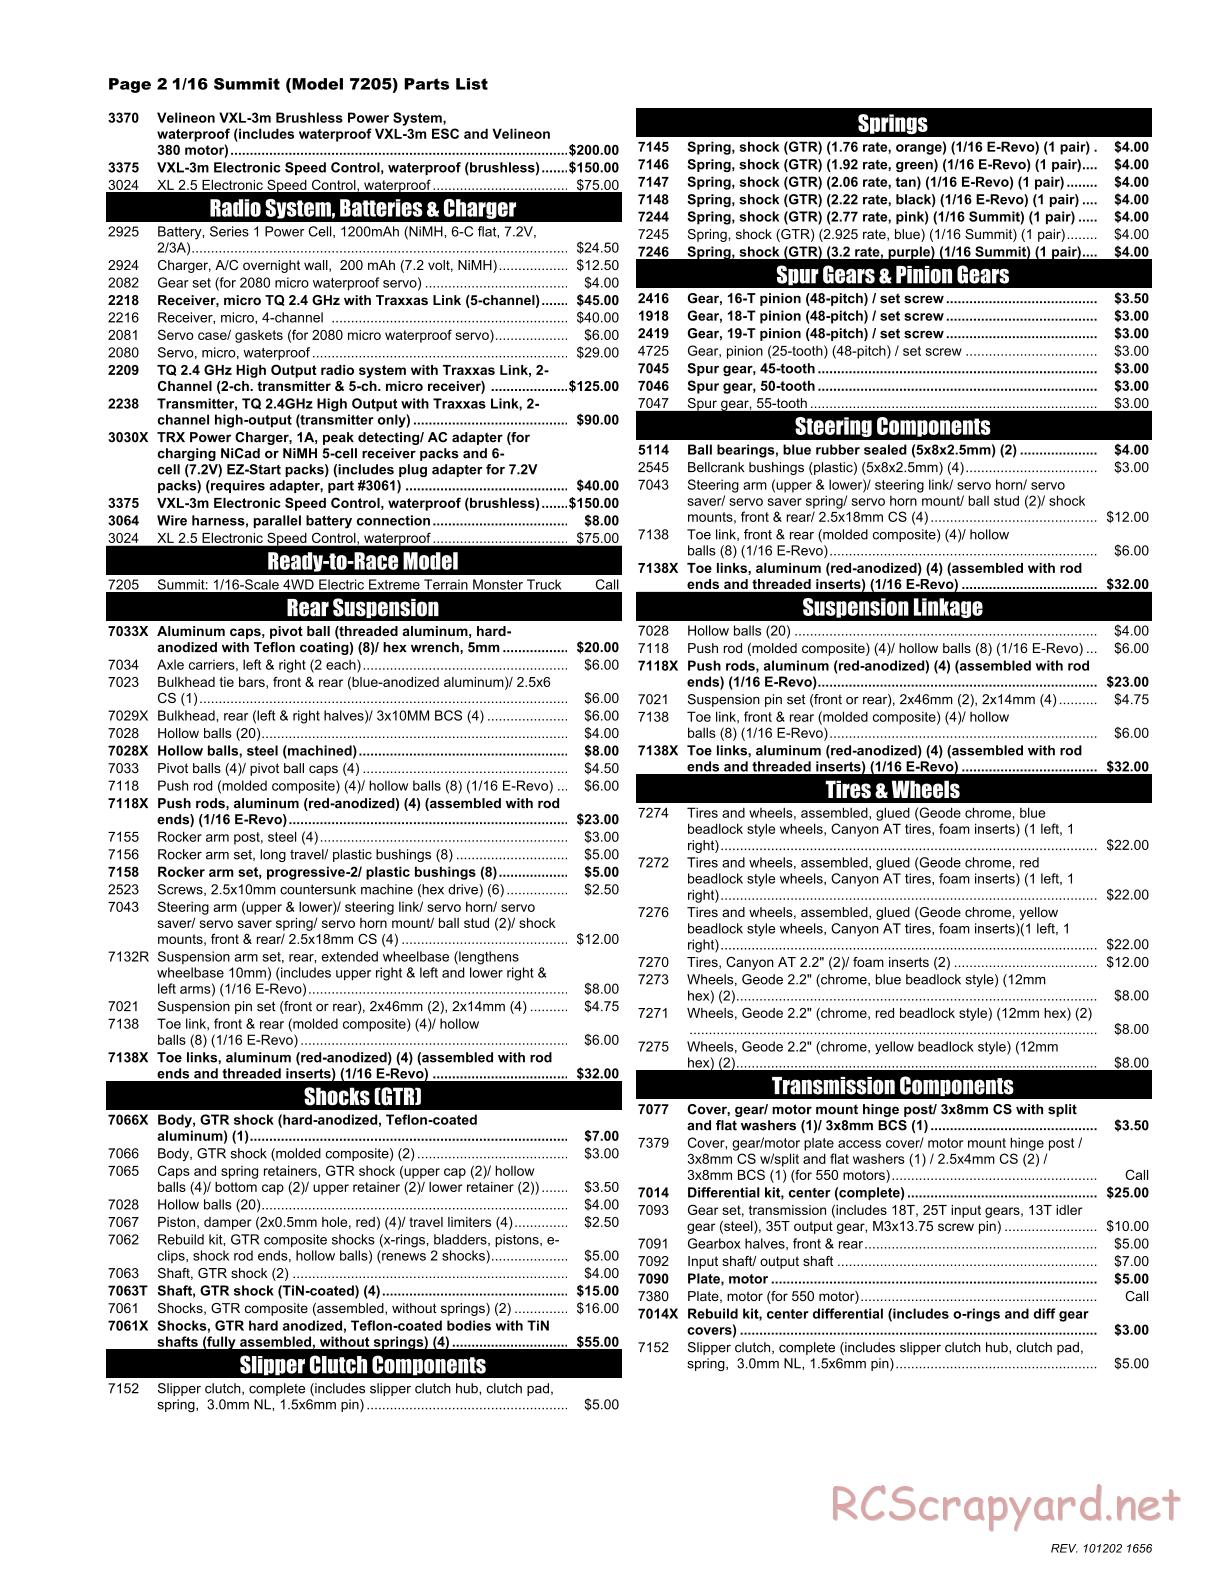 Traxxas - 1/16 Summit (2011) - Parts List - Page 2